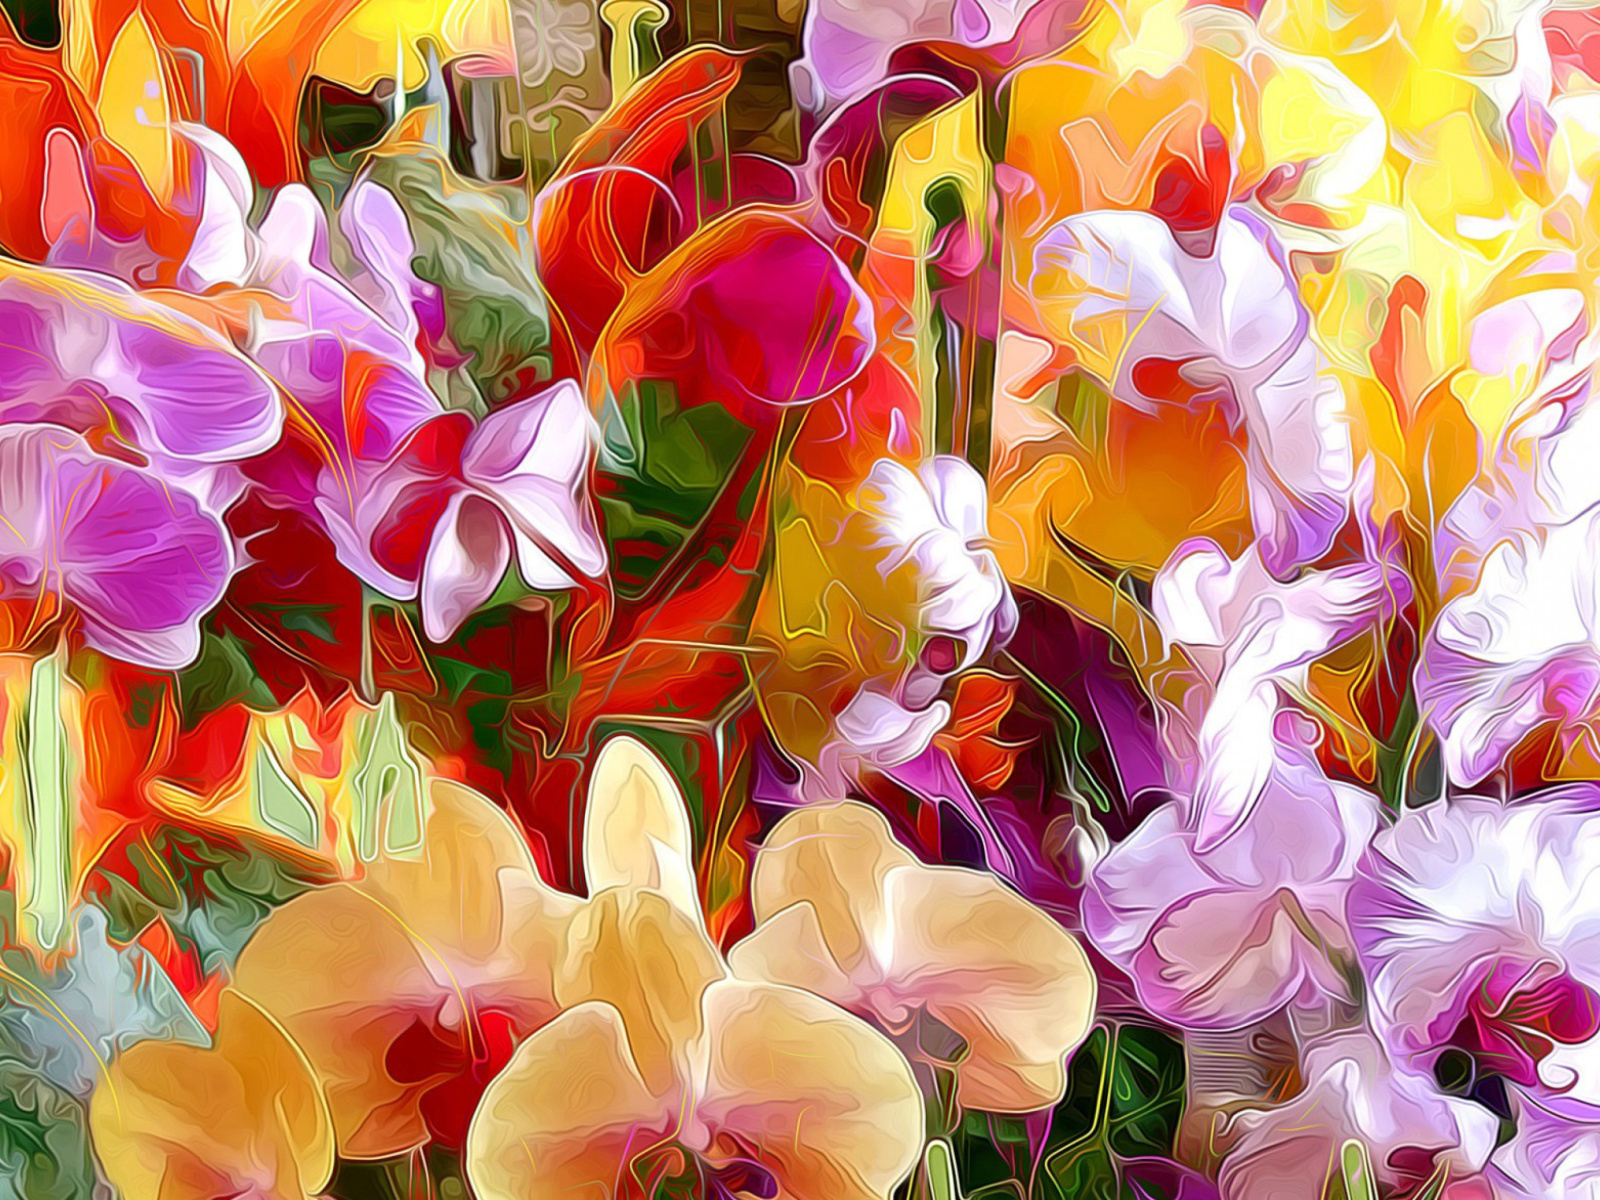 Beautiful flower drawn by oil color on canvas screenshot #1 1600x1200